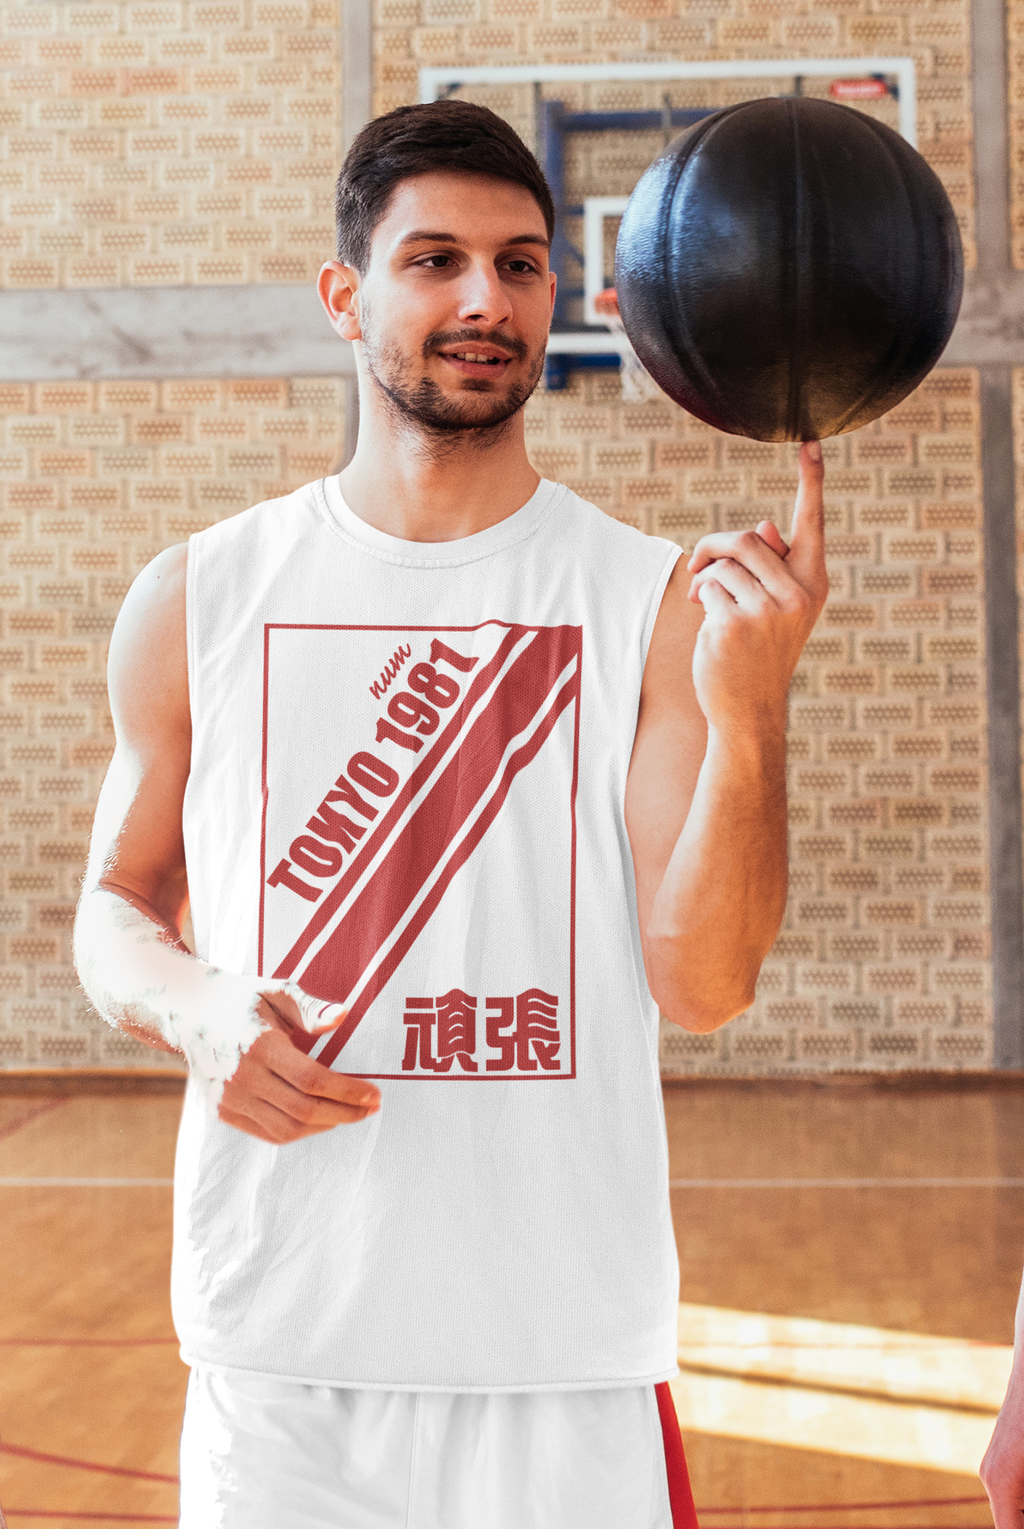 tank-top-mockup-of-a-man-spinning-a-ball-34054-r-el2 (1).png